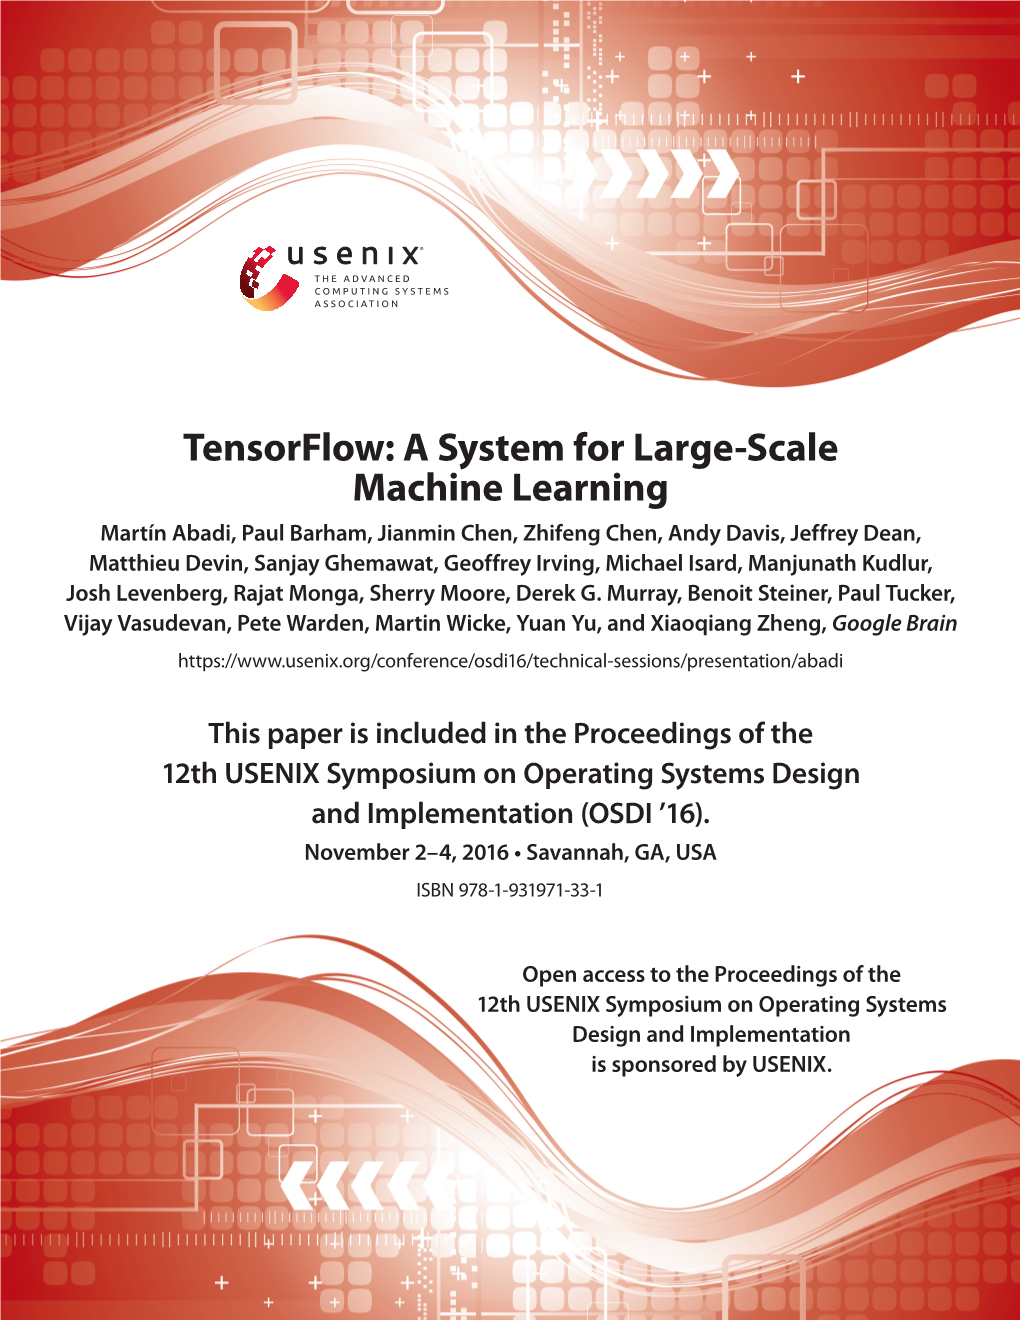 Tensorflow: a System for Large-Scale Machine